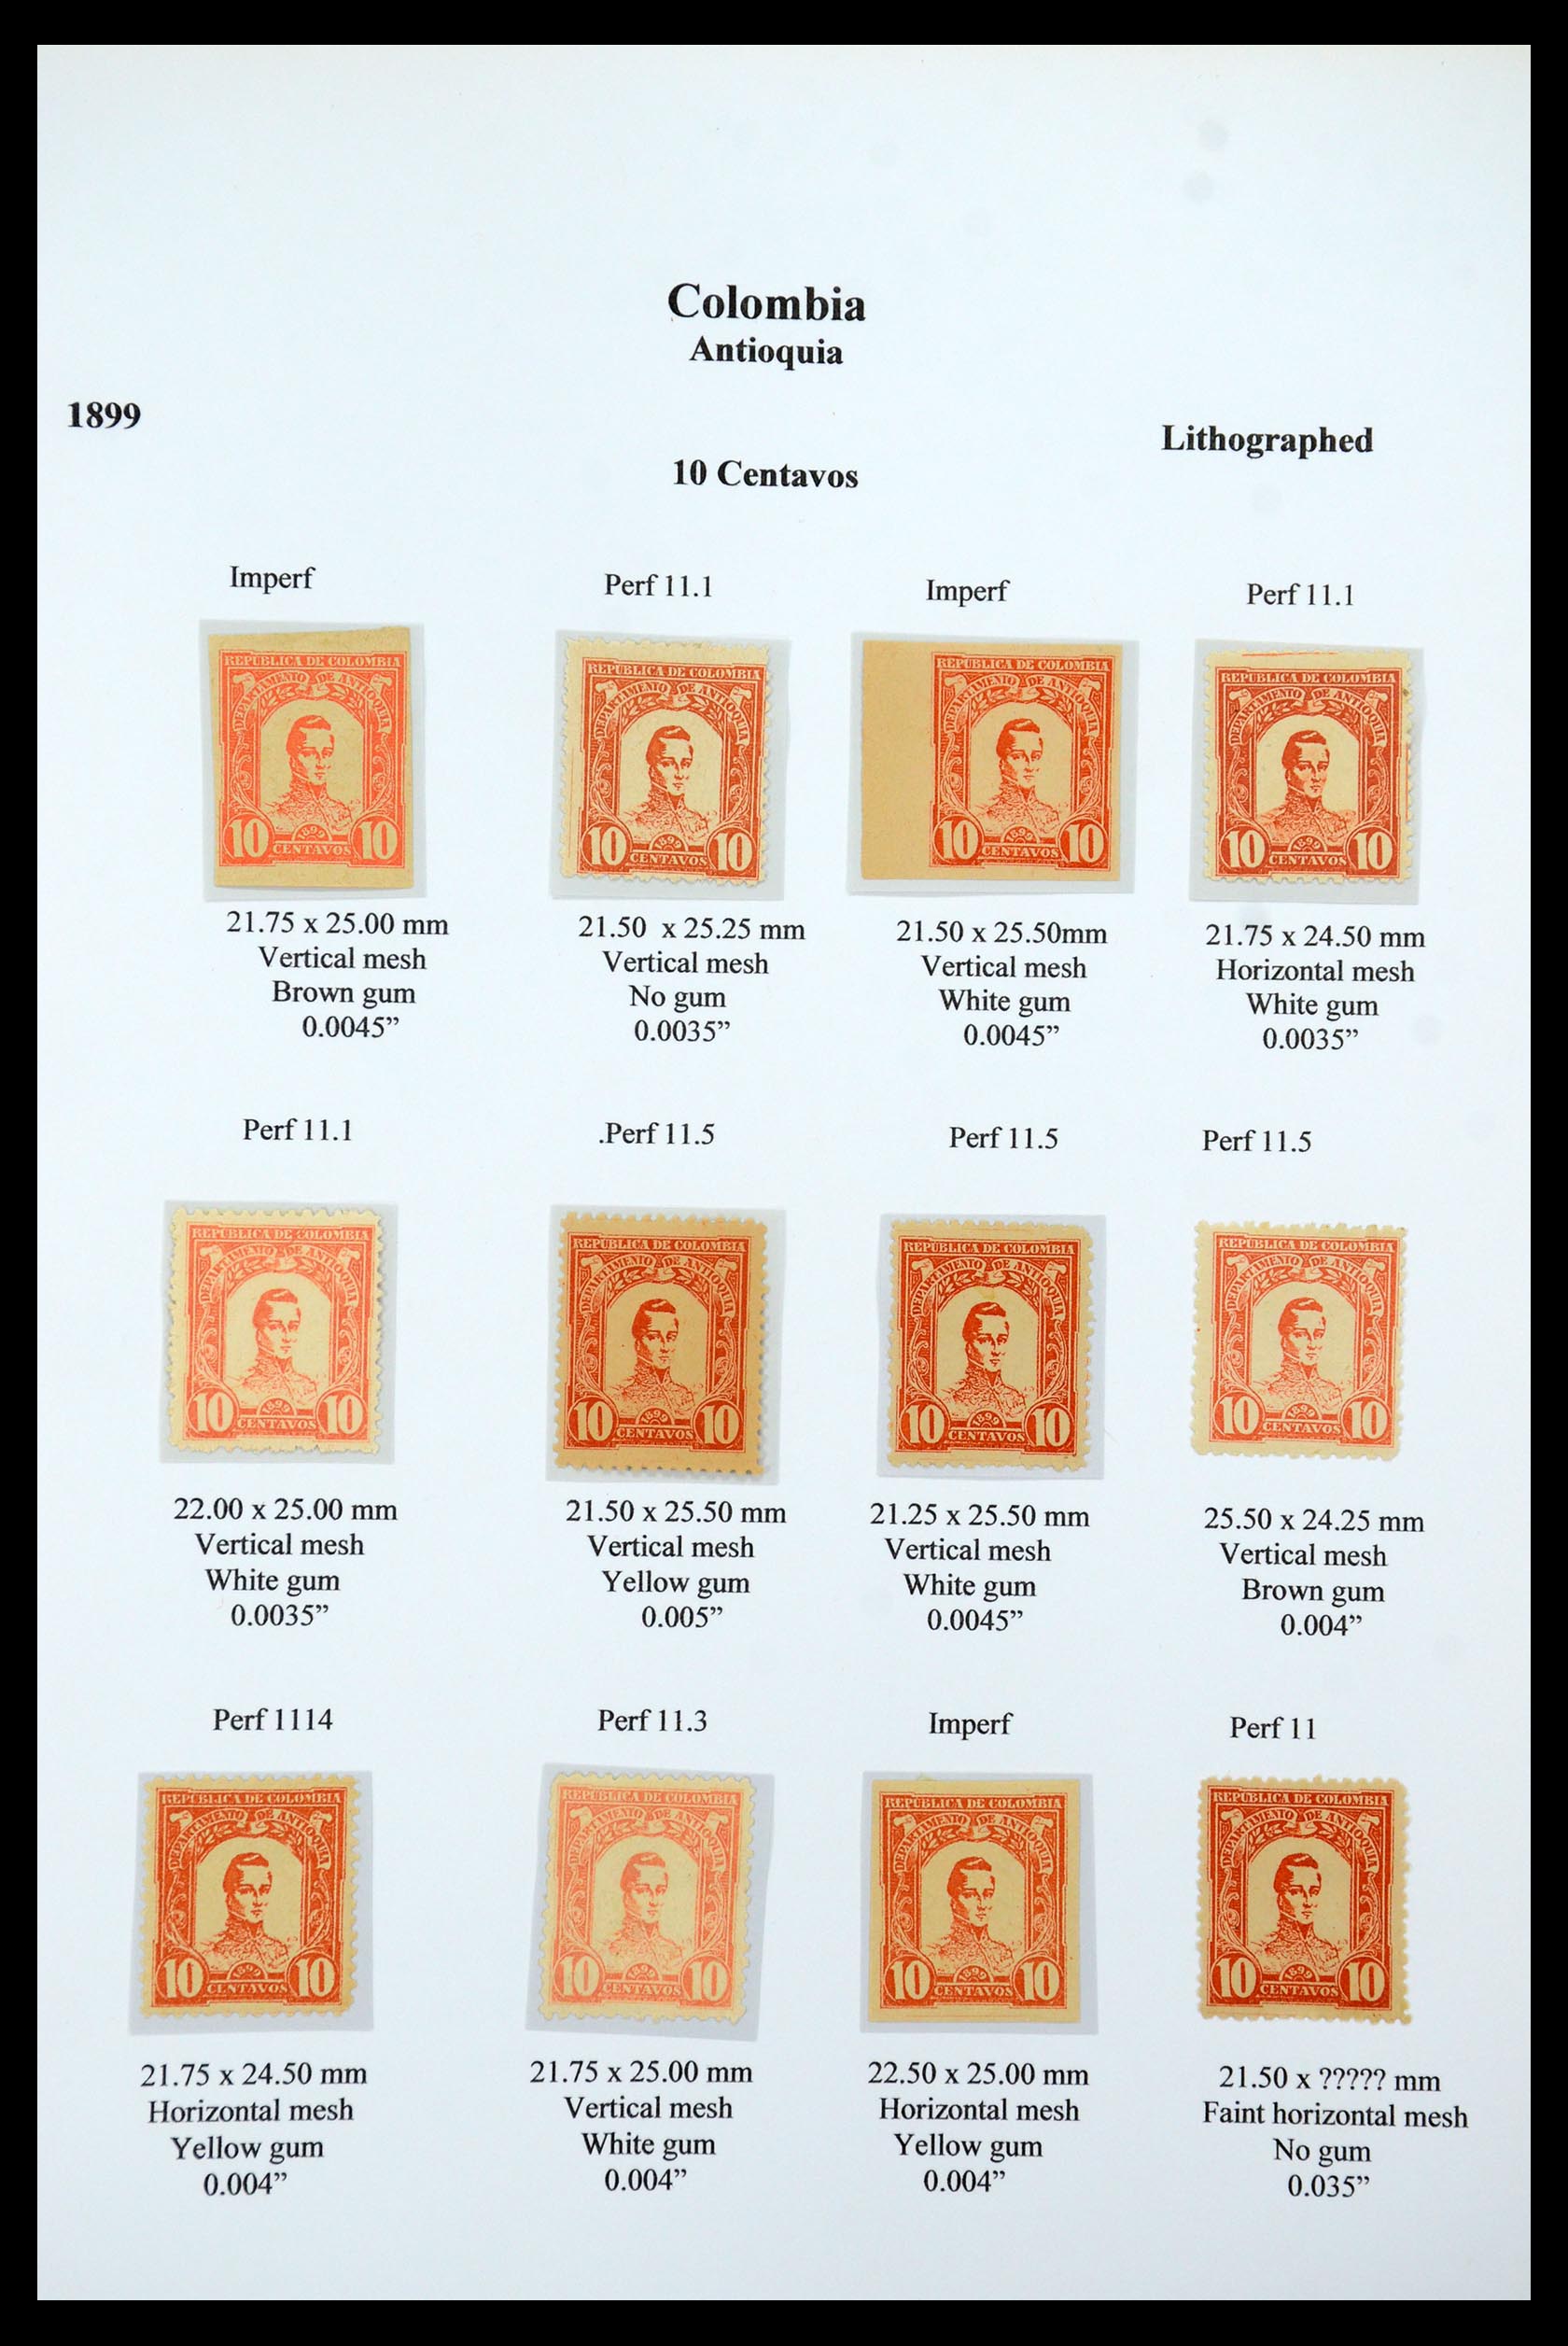 35519 043 - Stamp Collection 35519 Colombia Antioquia 1899.